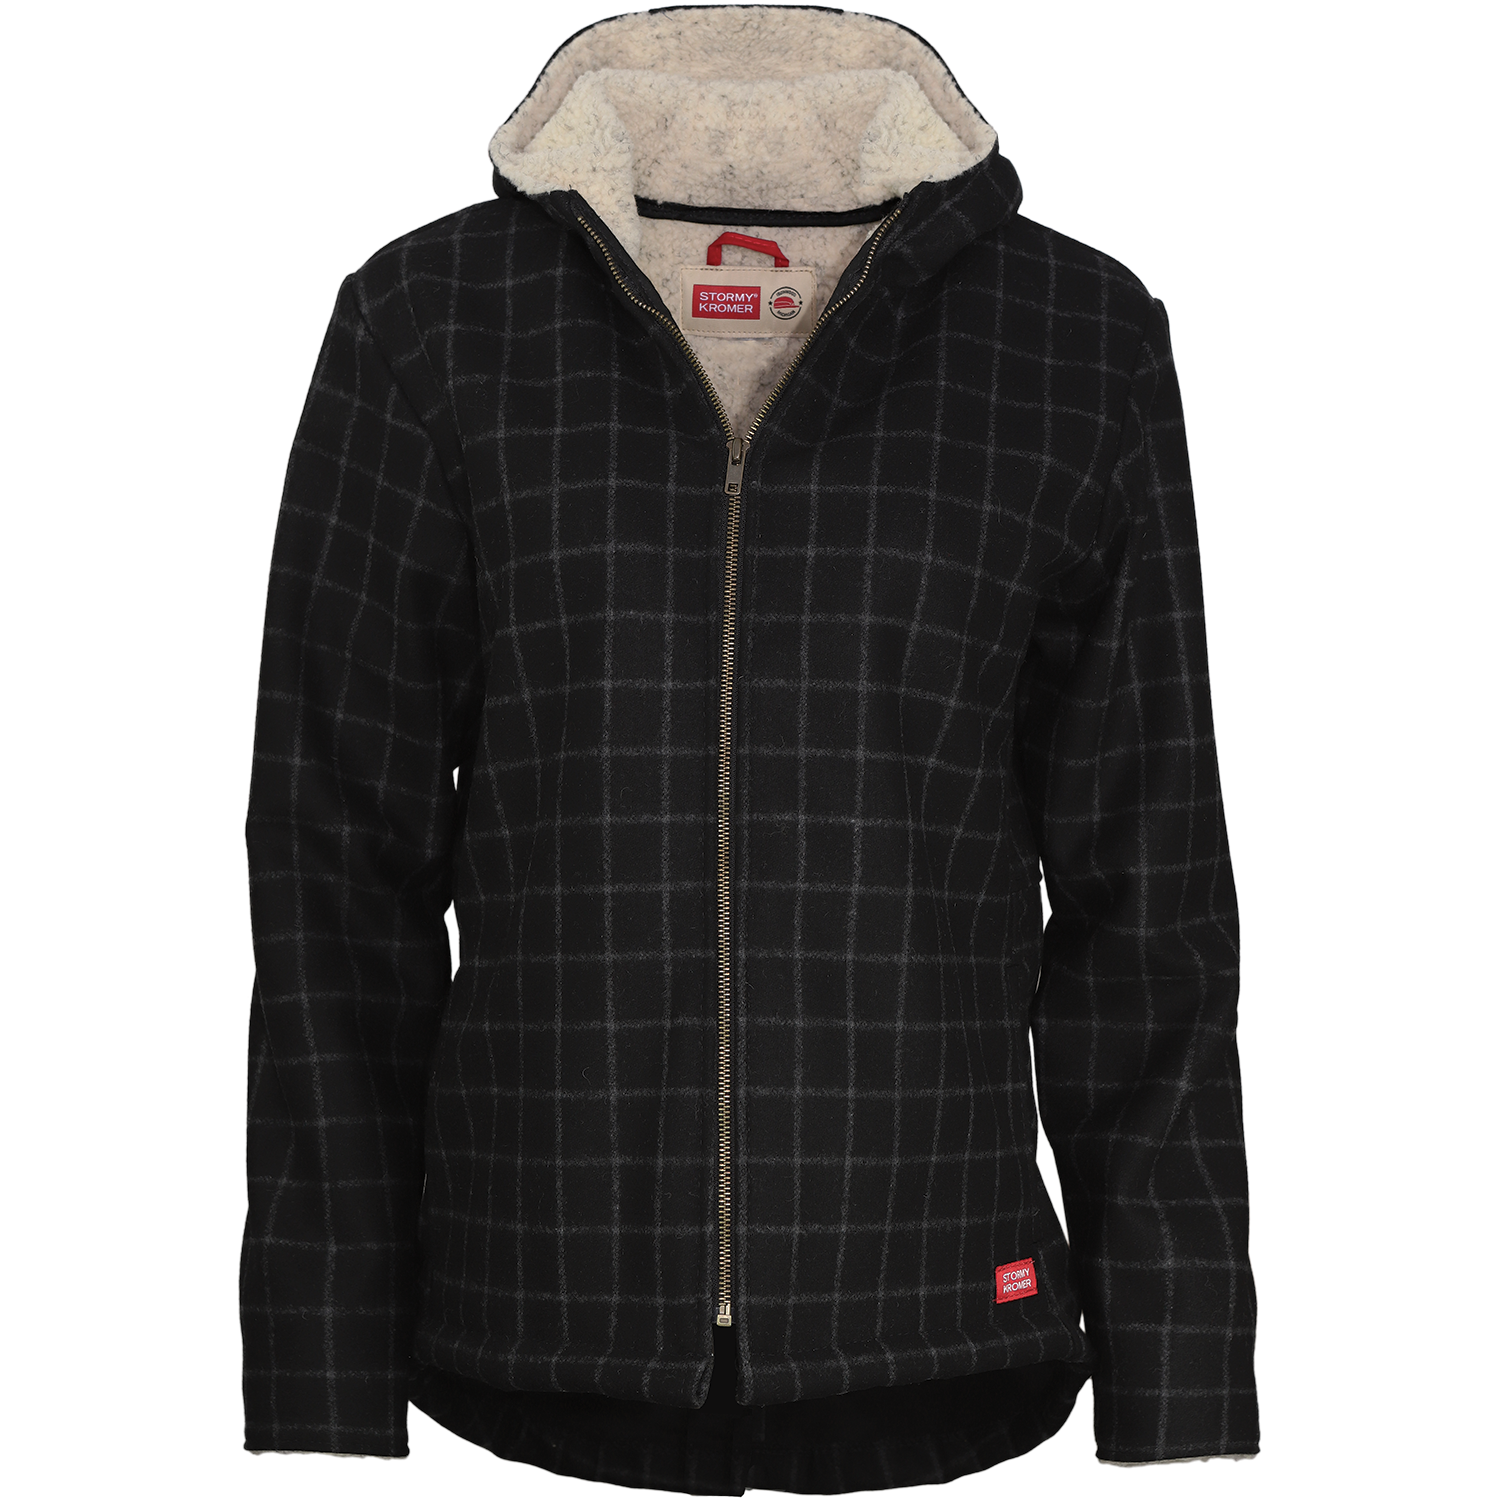 Picture of Stormy Kromer 52170 Swallowtail Jacket